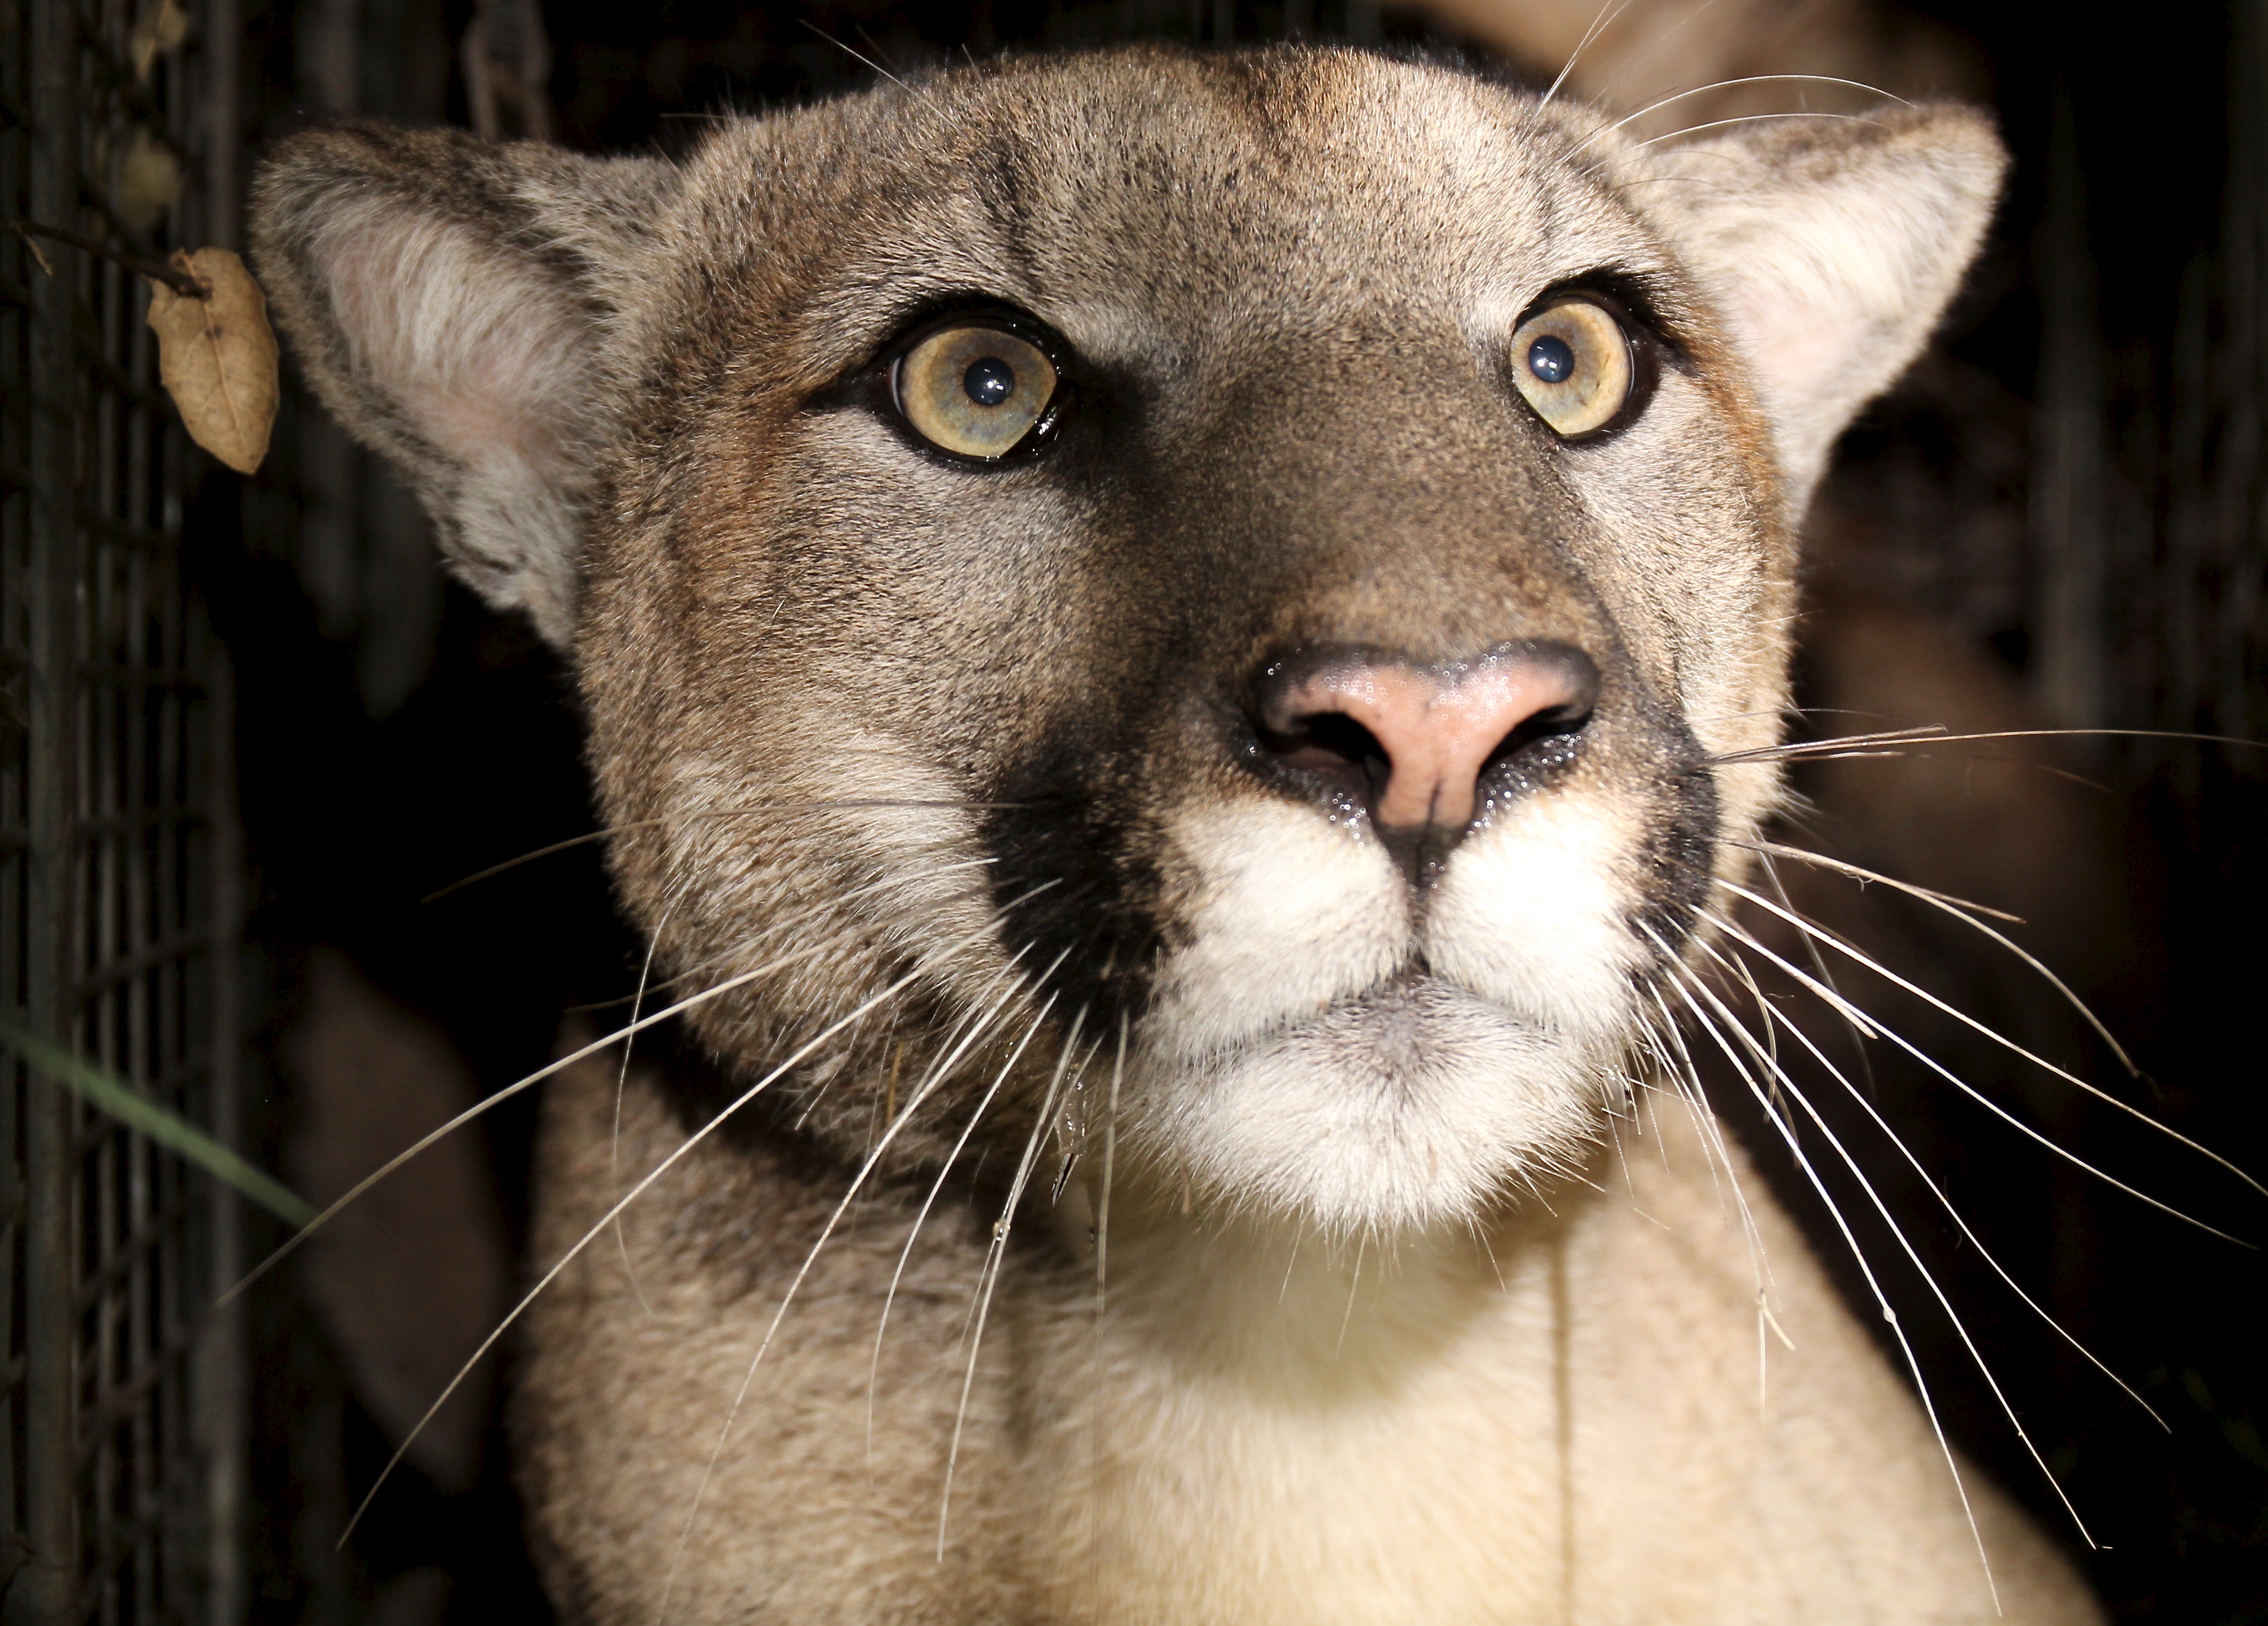 a close-up of a mountain lion's face with whiskers, a pink nose, and green/yellow eyes